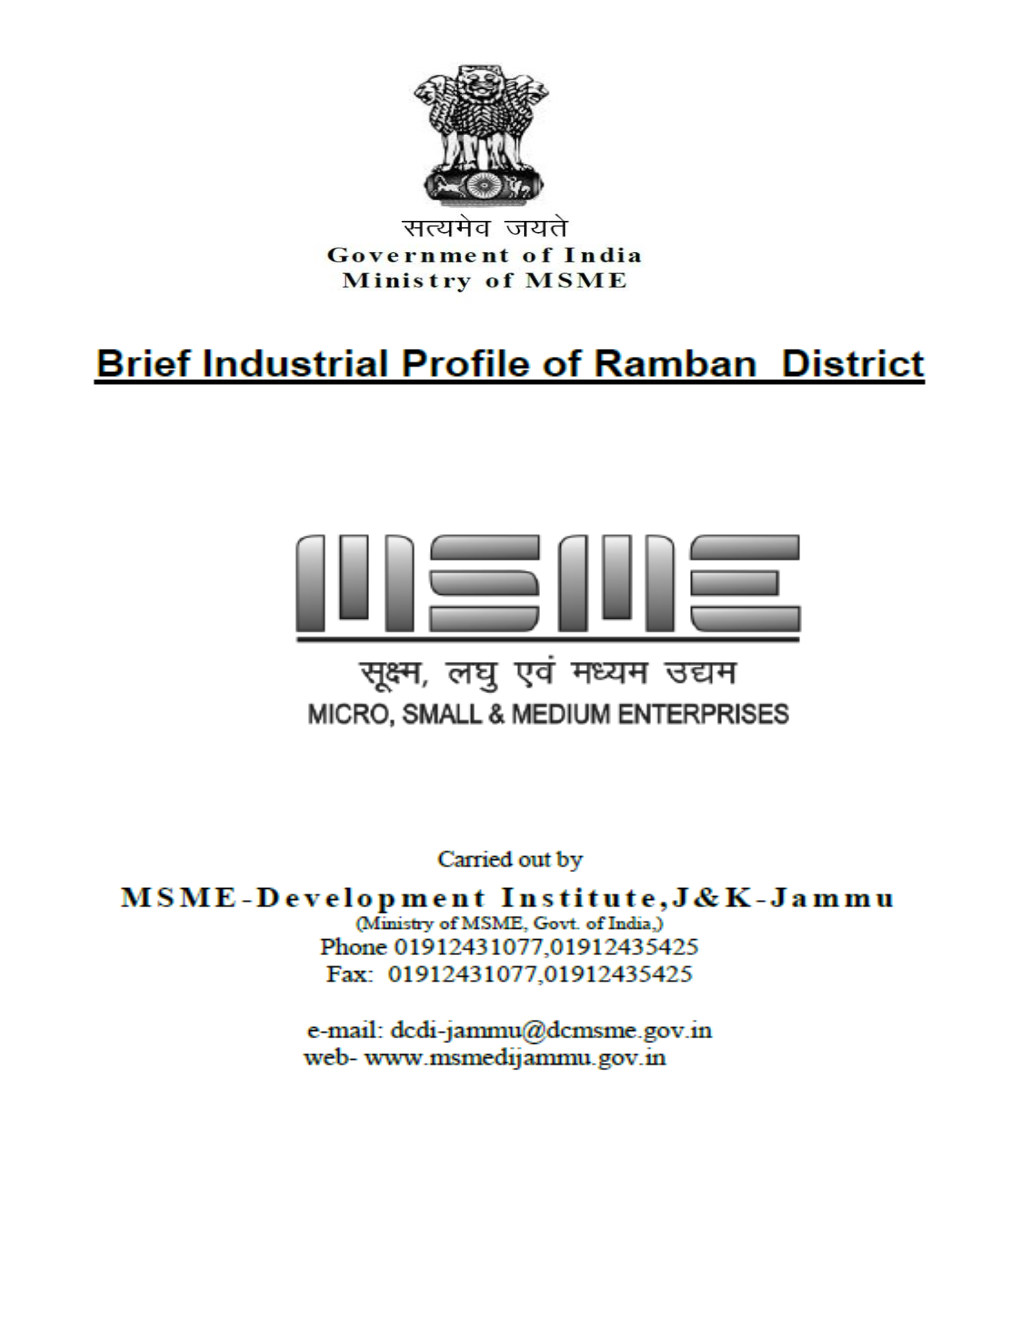 Brief Industrial Profile of Ramban District